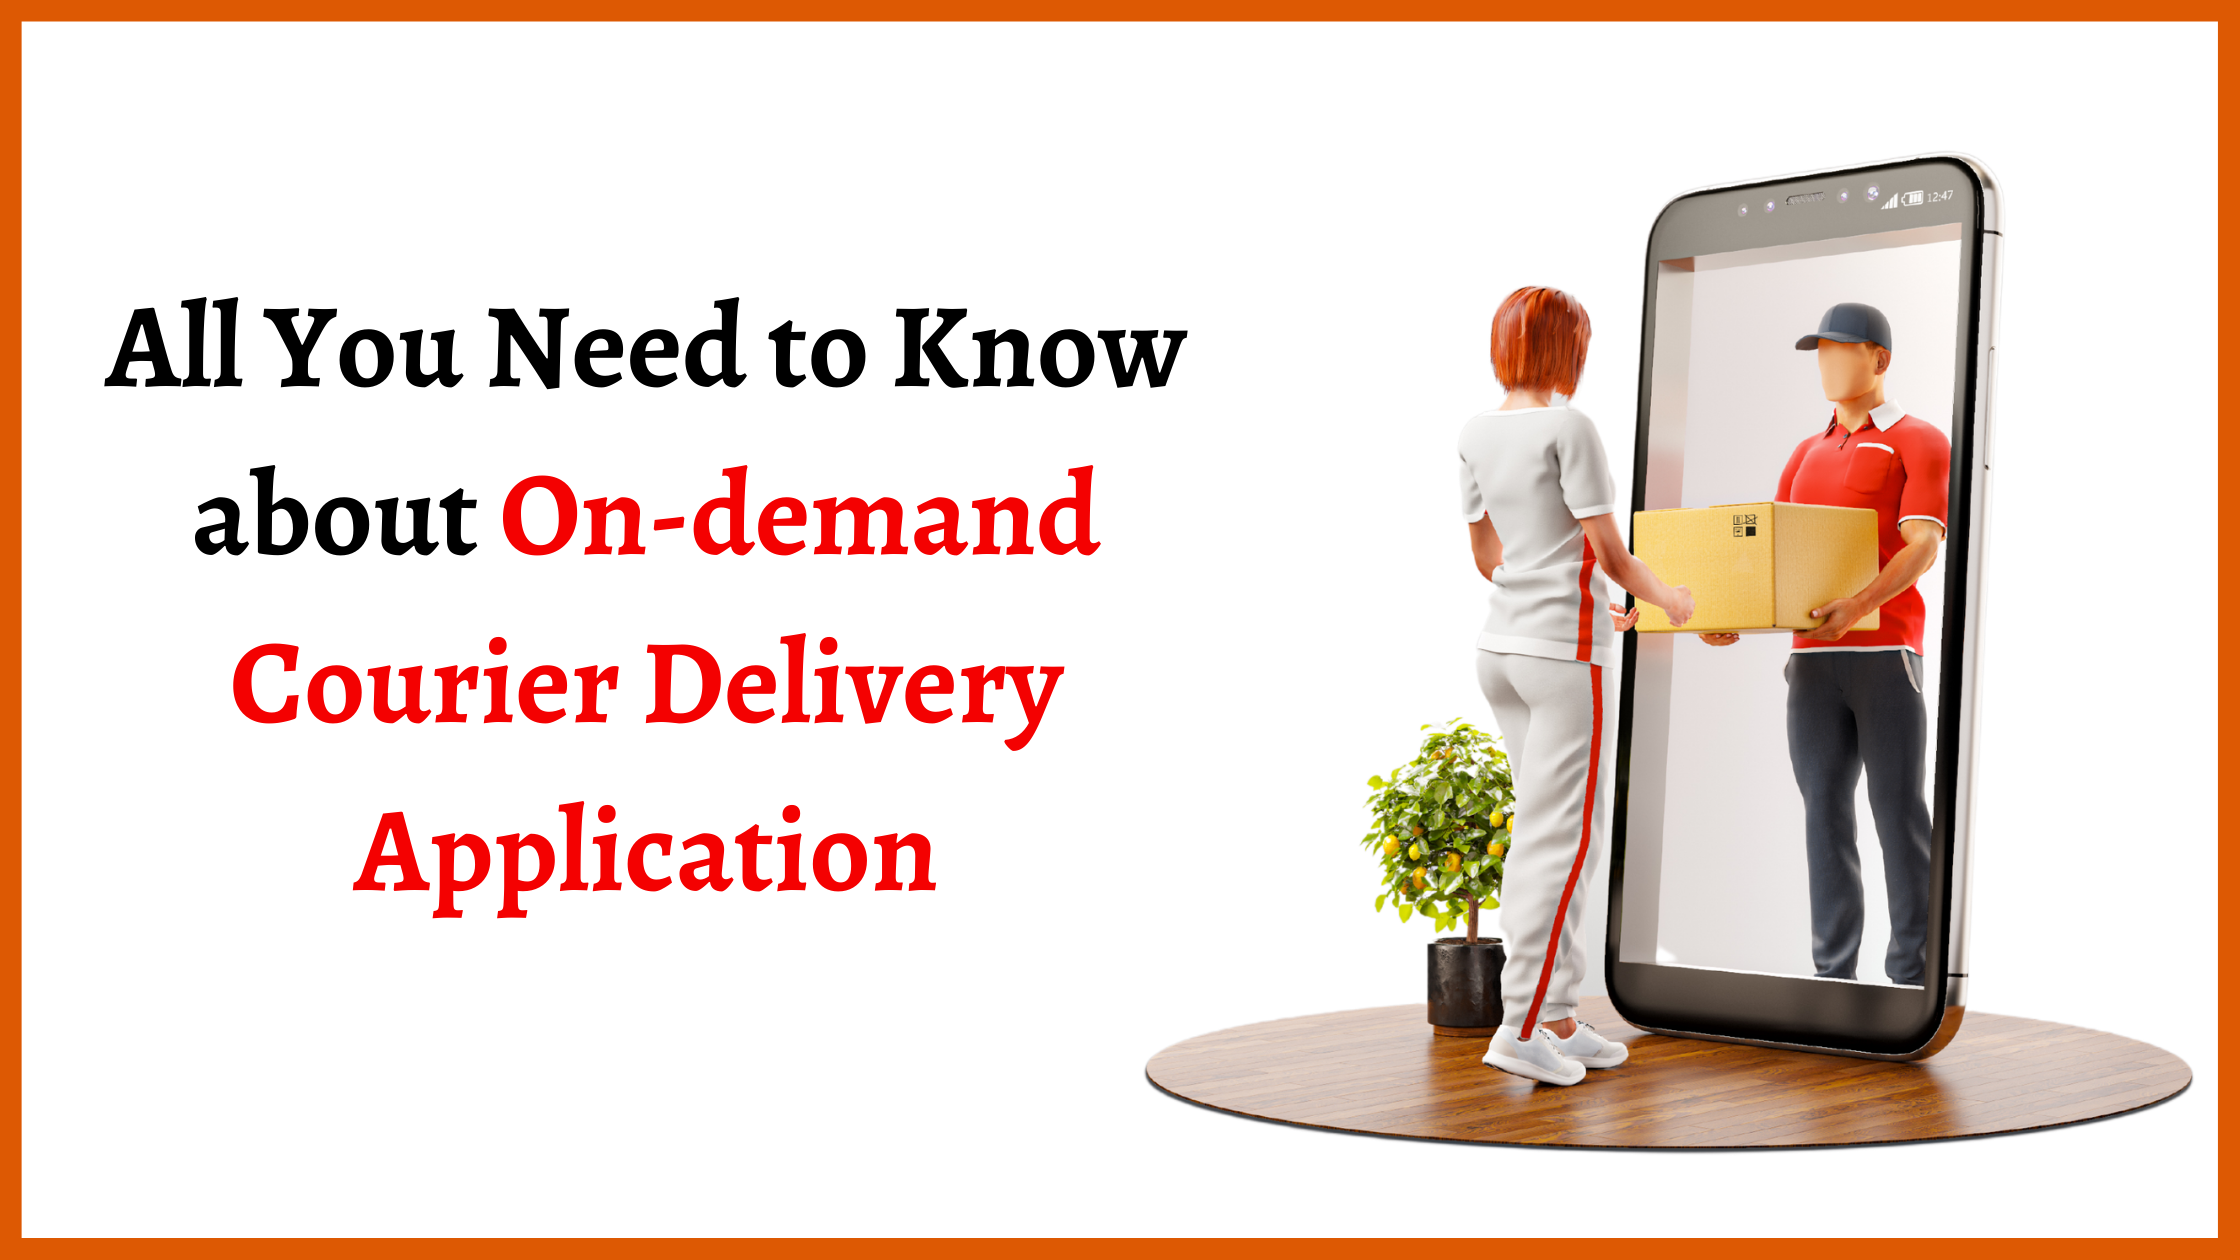 All You Need to Know About On-Demand Courier Delivery Application